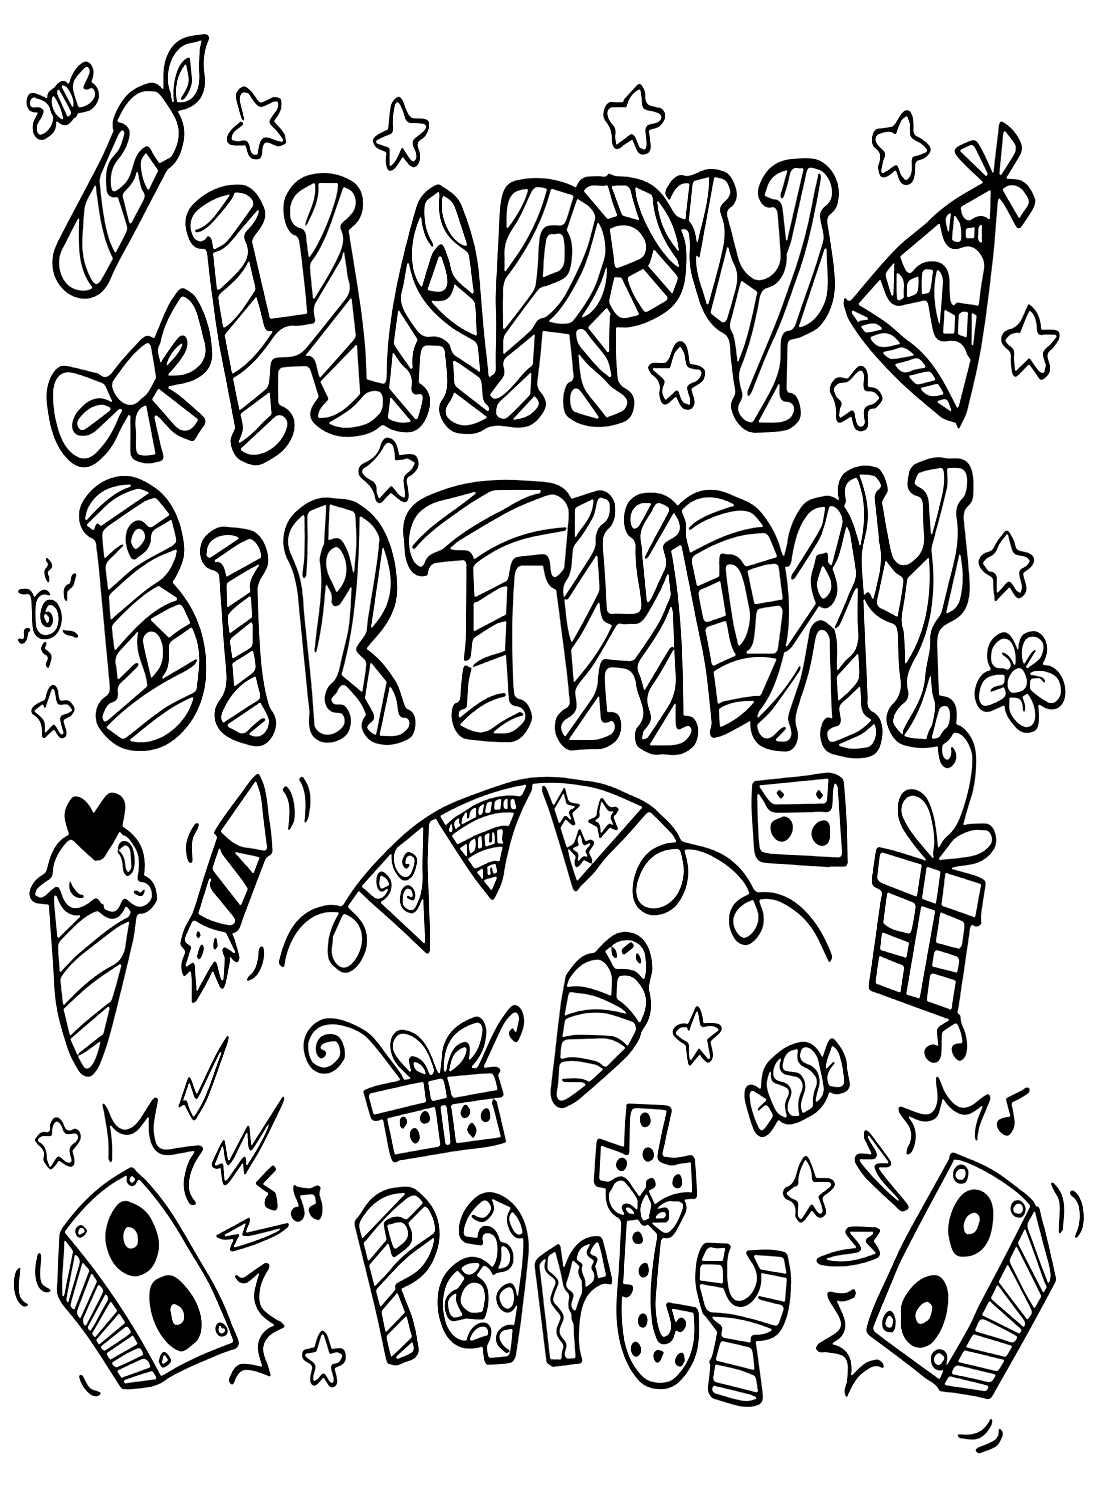 Happy Birthday February Coloring Page - Free Printable Coloring Pages